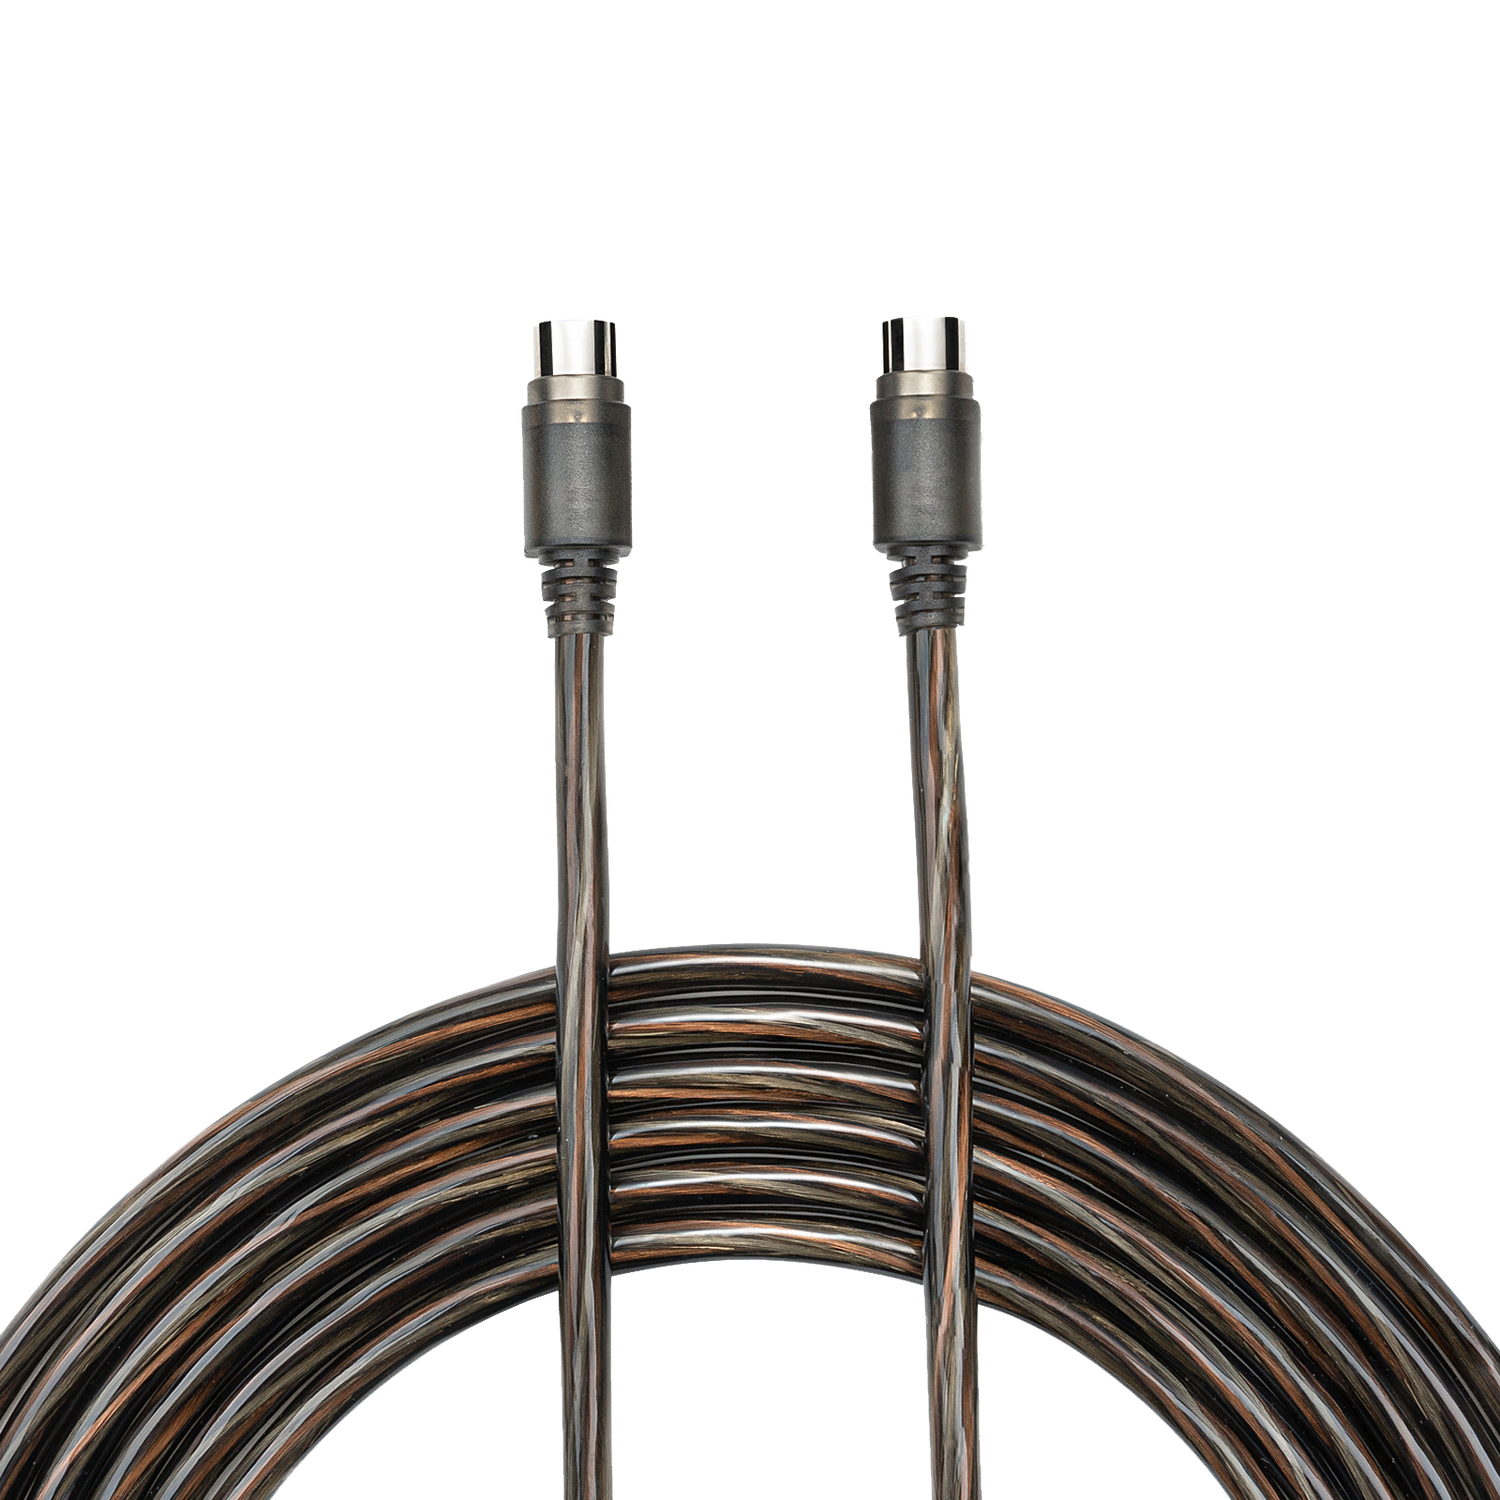 Edifier Cable for S2000Pro